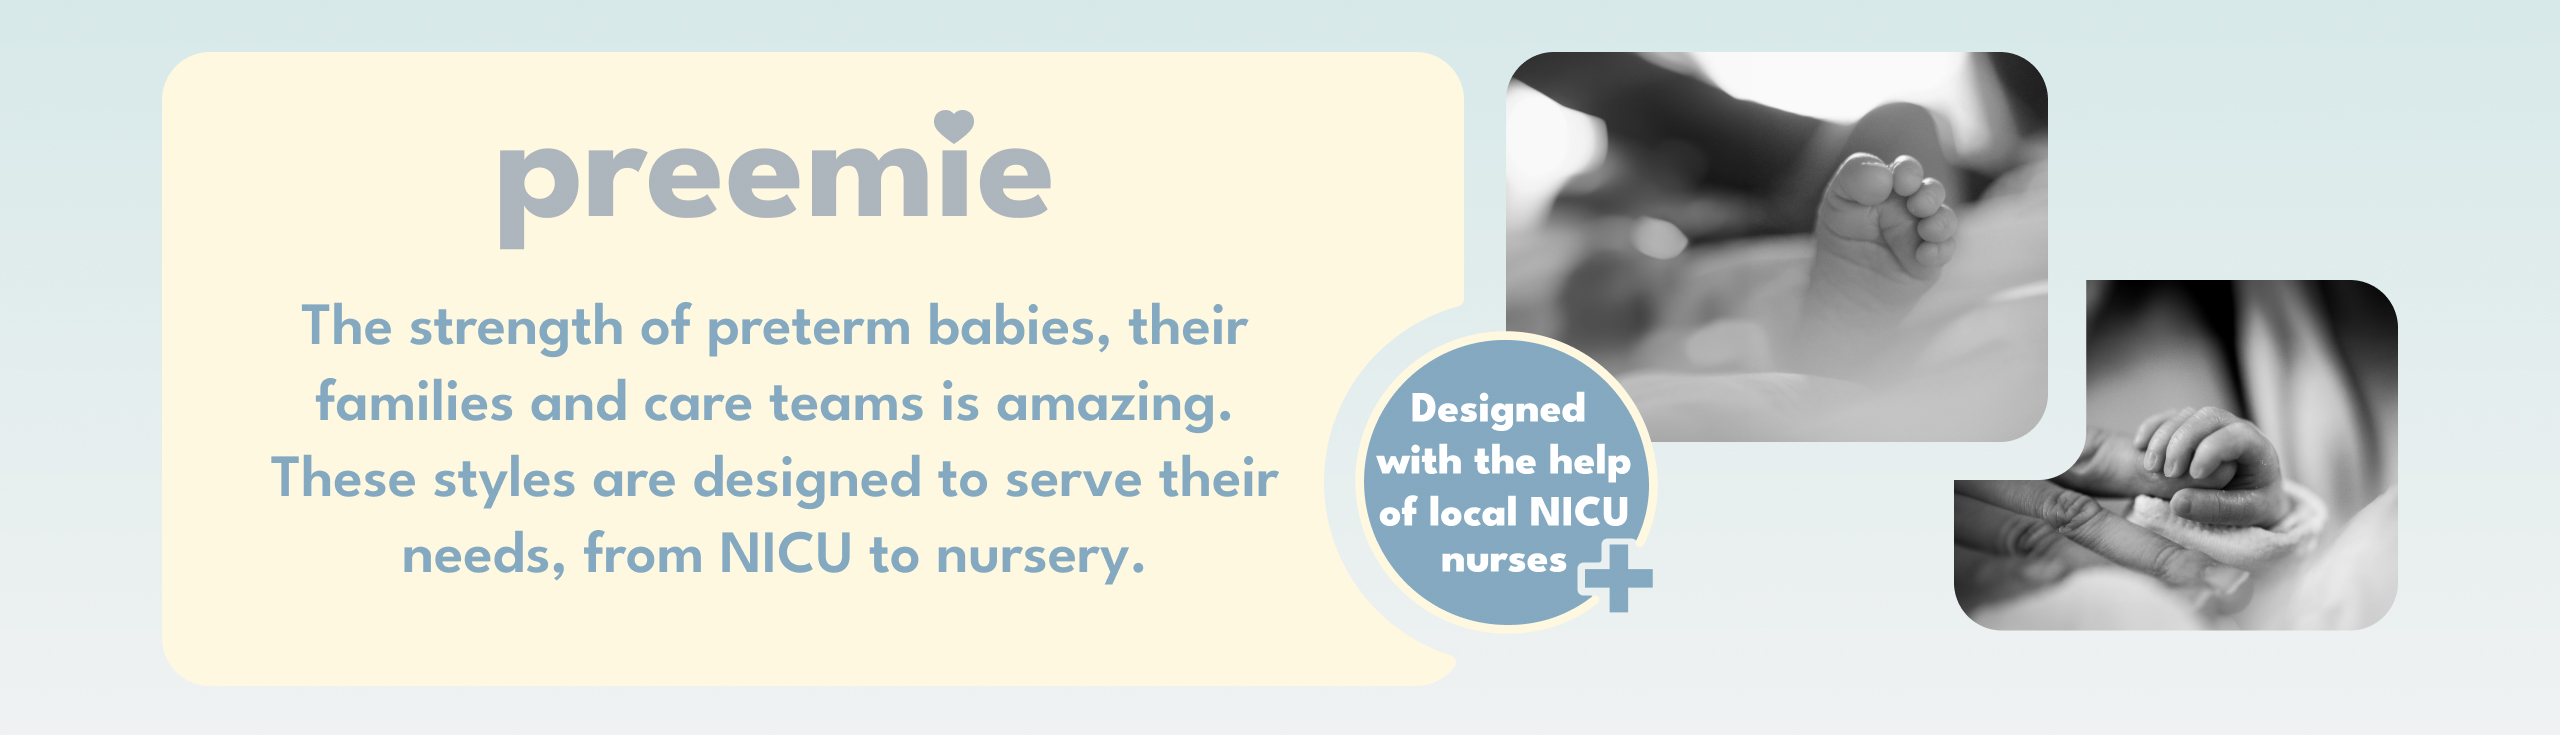 Preemie shop | thoughtfully-designed styles for preterm babies, from NICU to nursery.